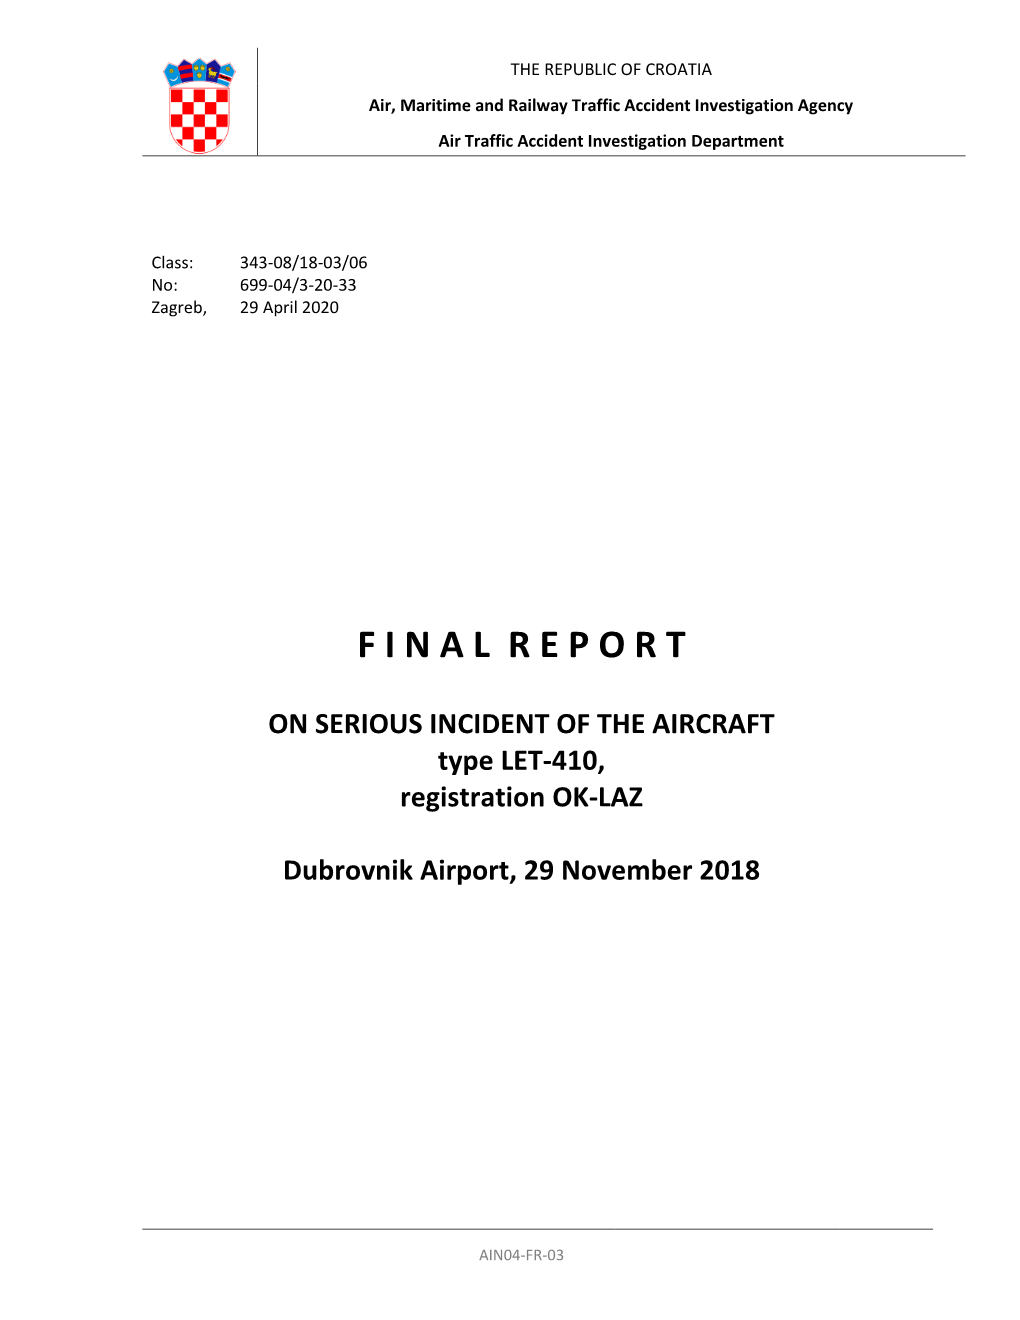 FINALREPORT on SERIOUS INCIDENT of the AIRCRAFT Type